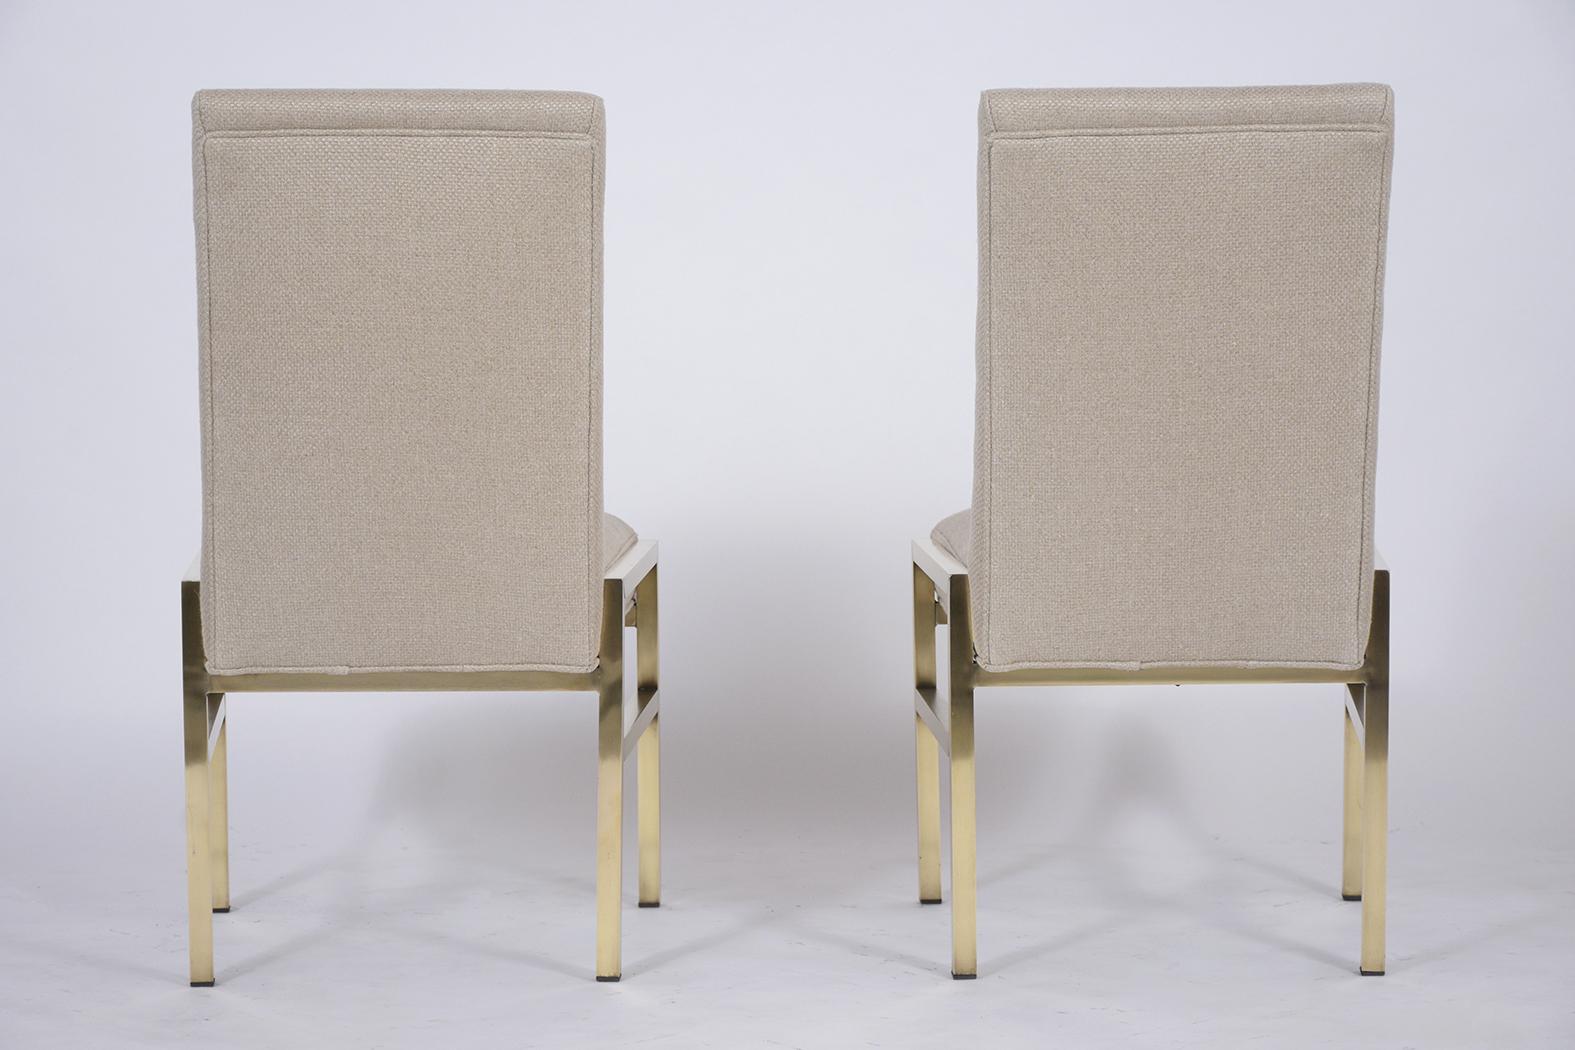 Restored Mastercraft Mid-Century Brass Side Chairs with Beige Wool Upholstery For Sale 4